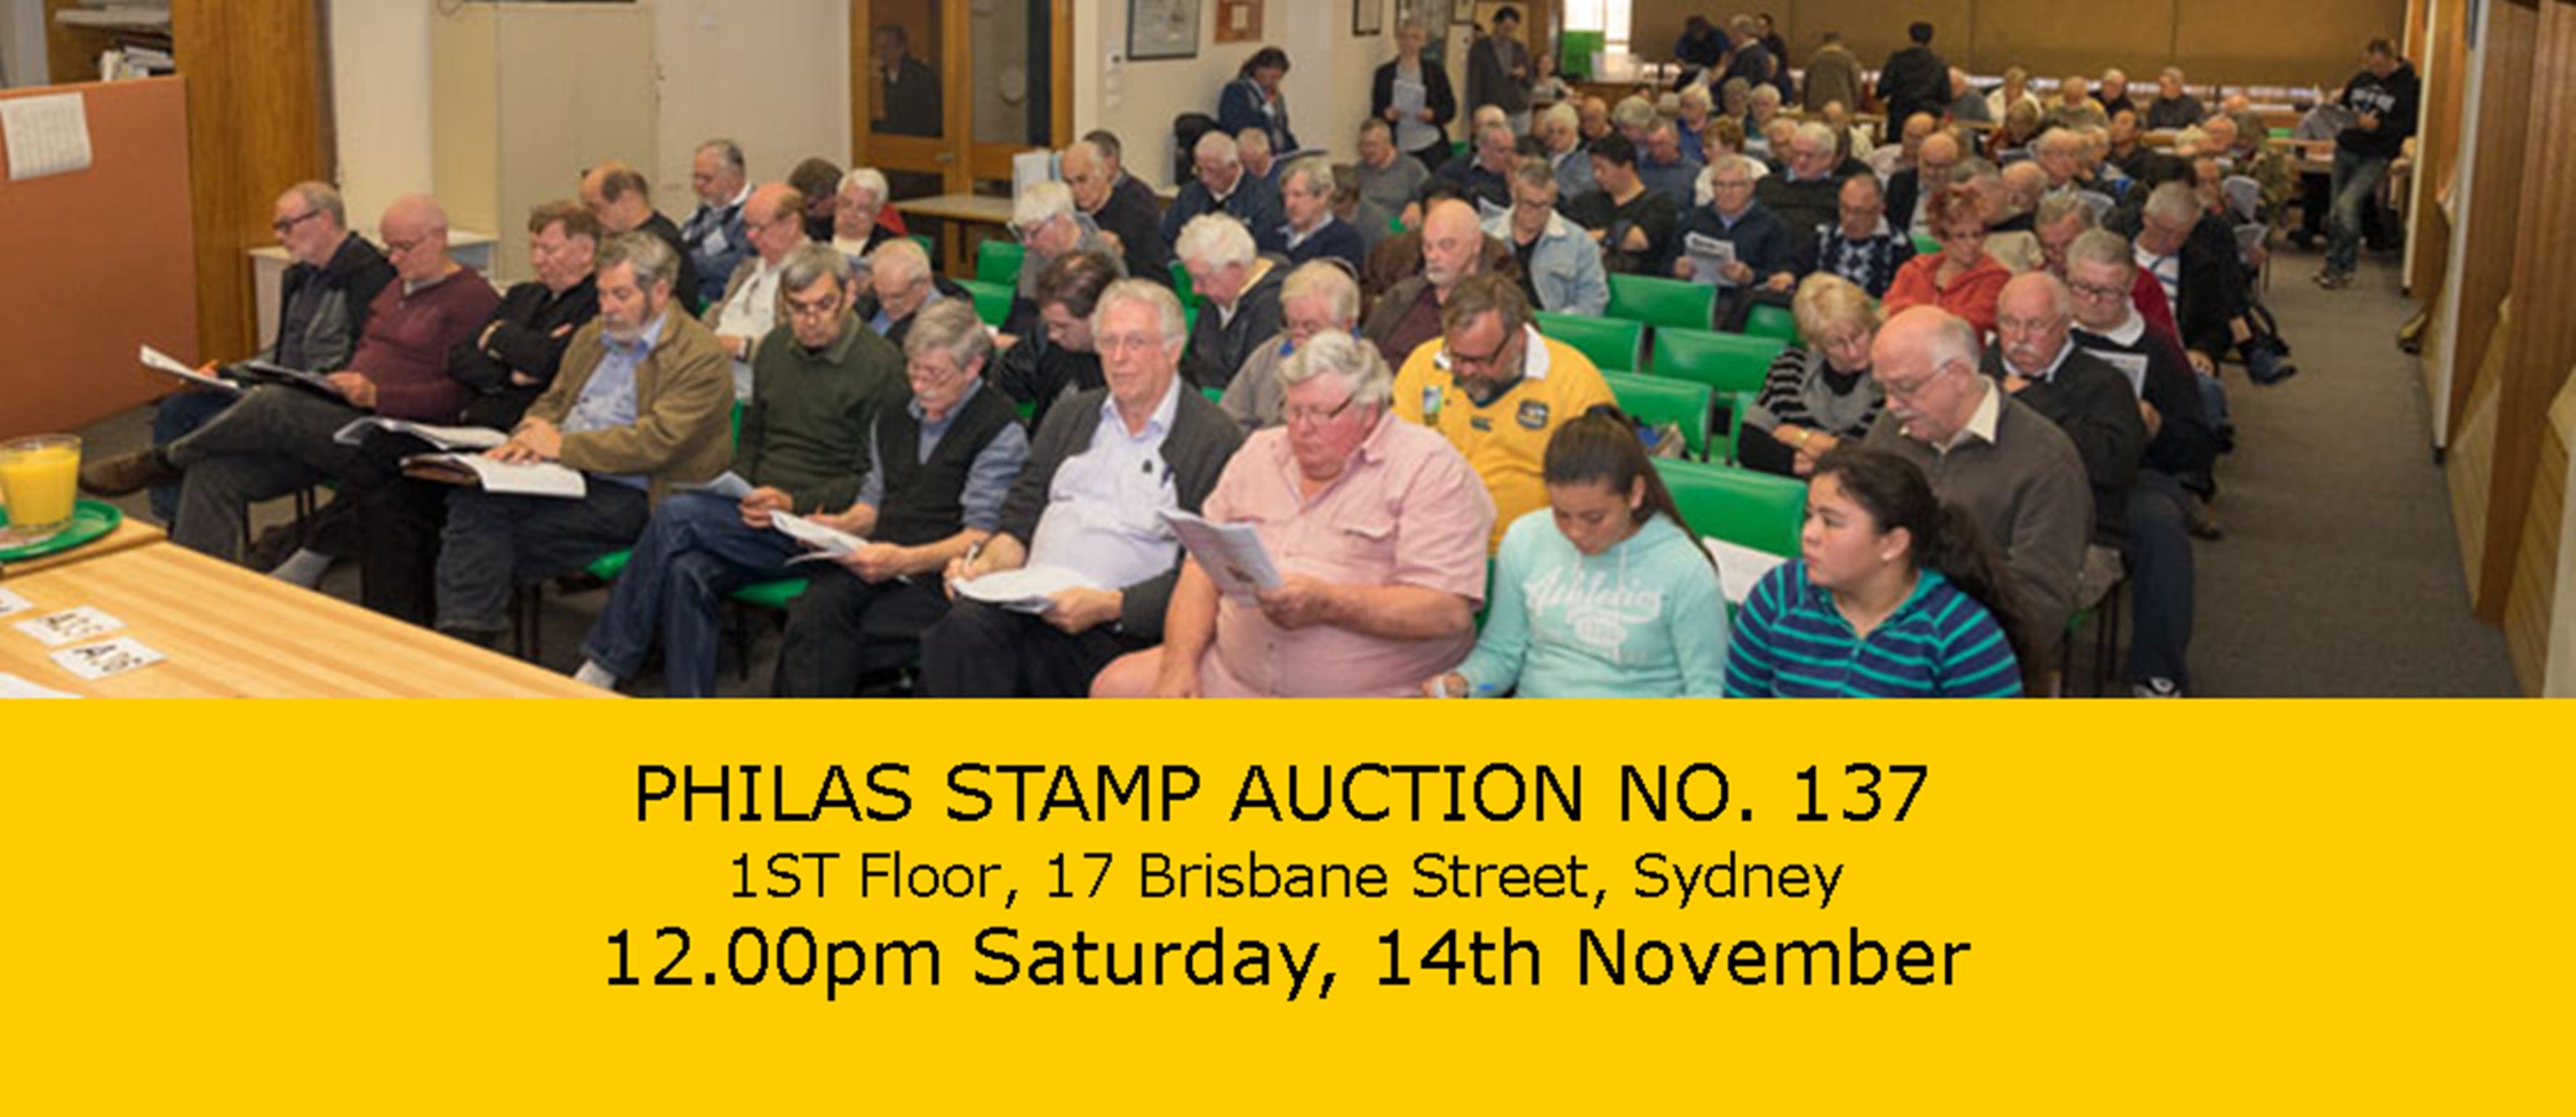 PHILAS Stamp Auction No. 137 - Accommodation Bookings